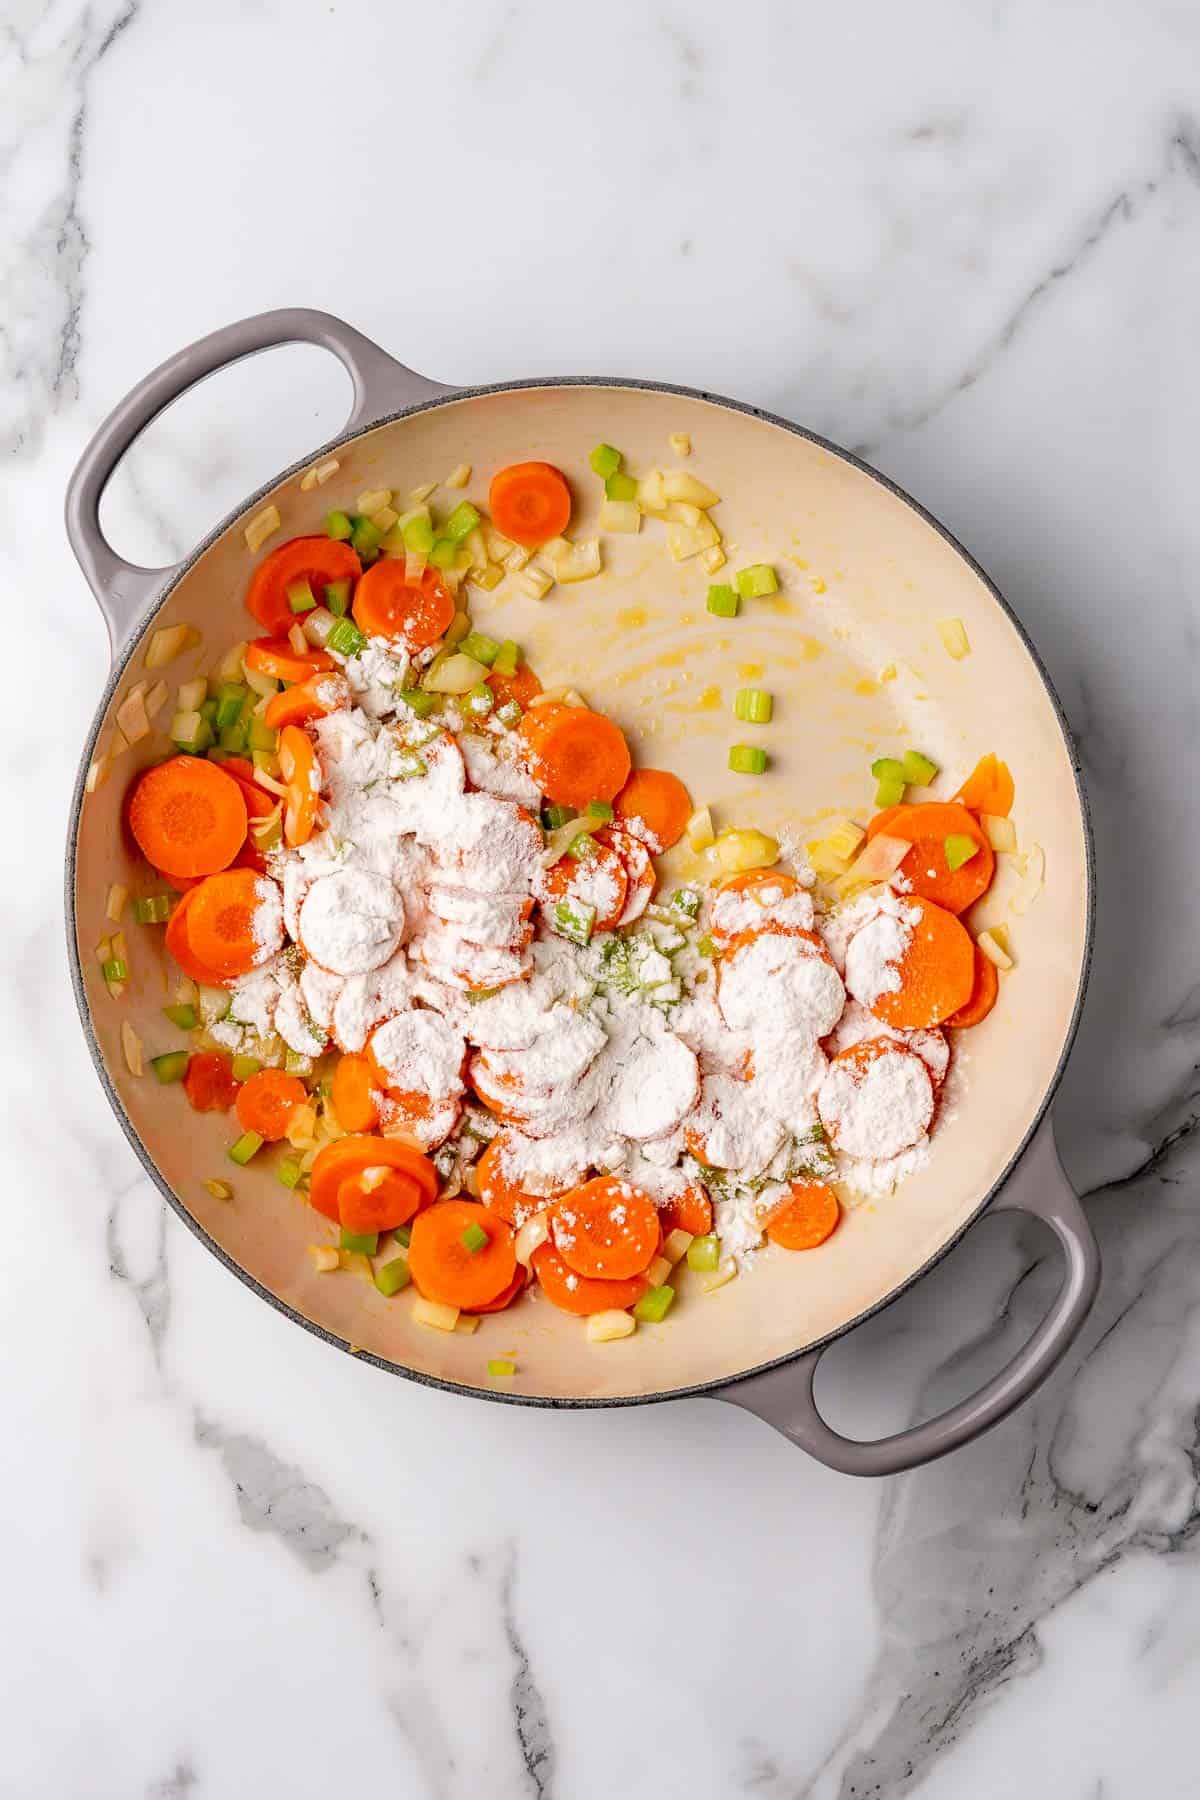 Flour sprinkled over the vegetables in the pan